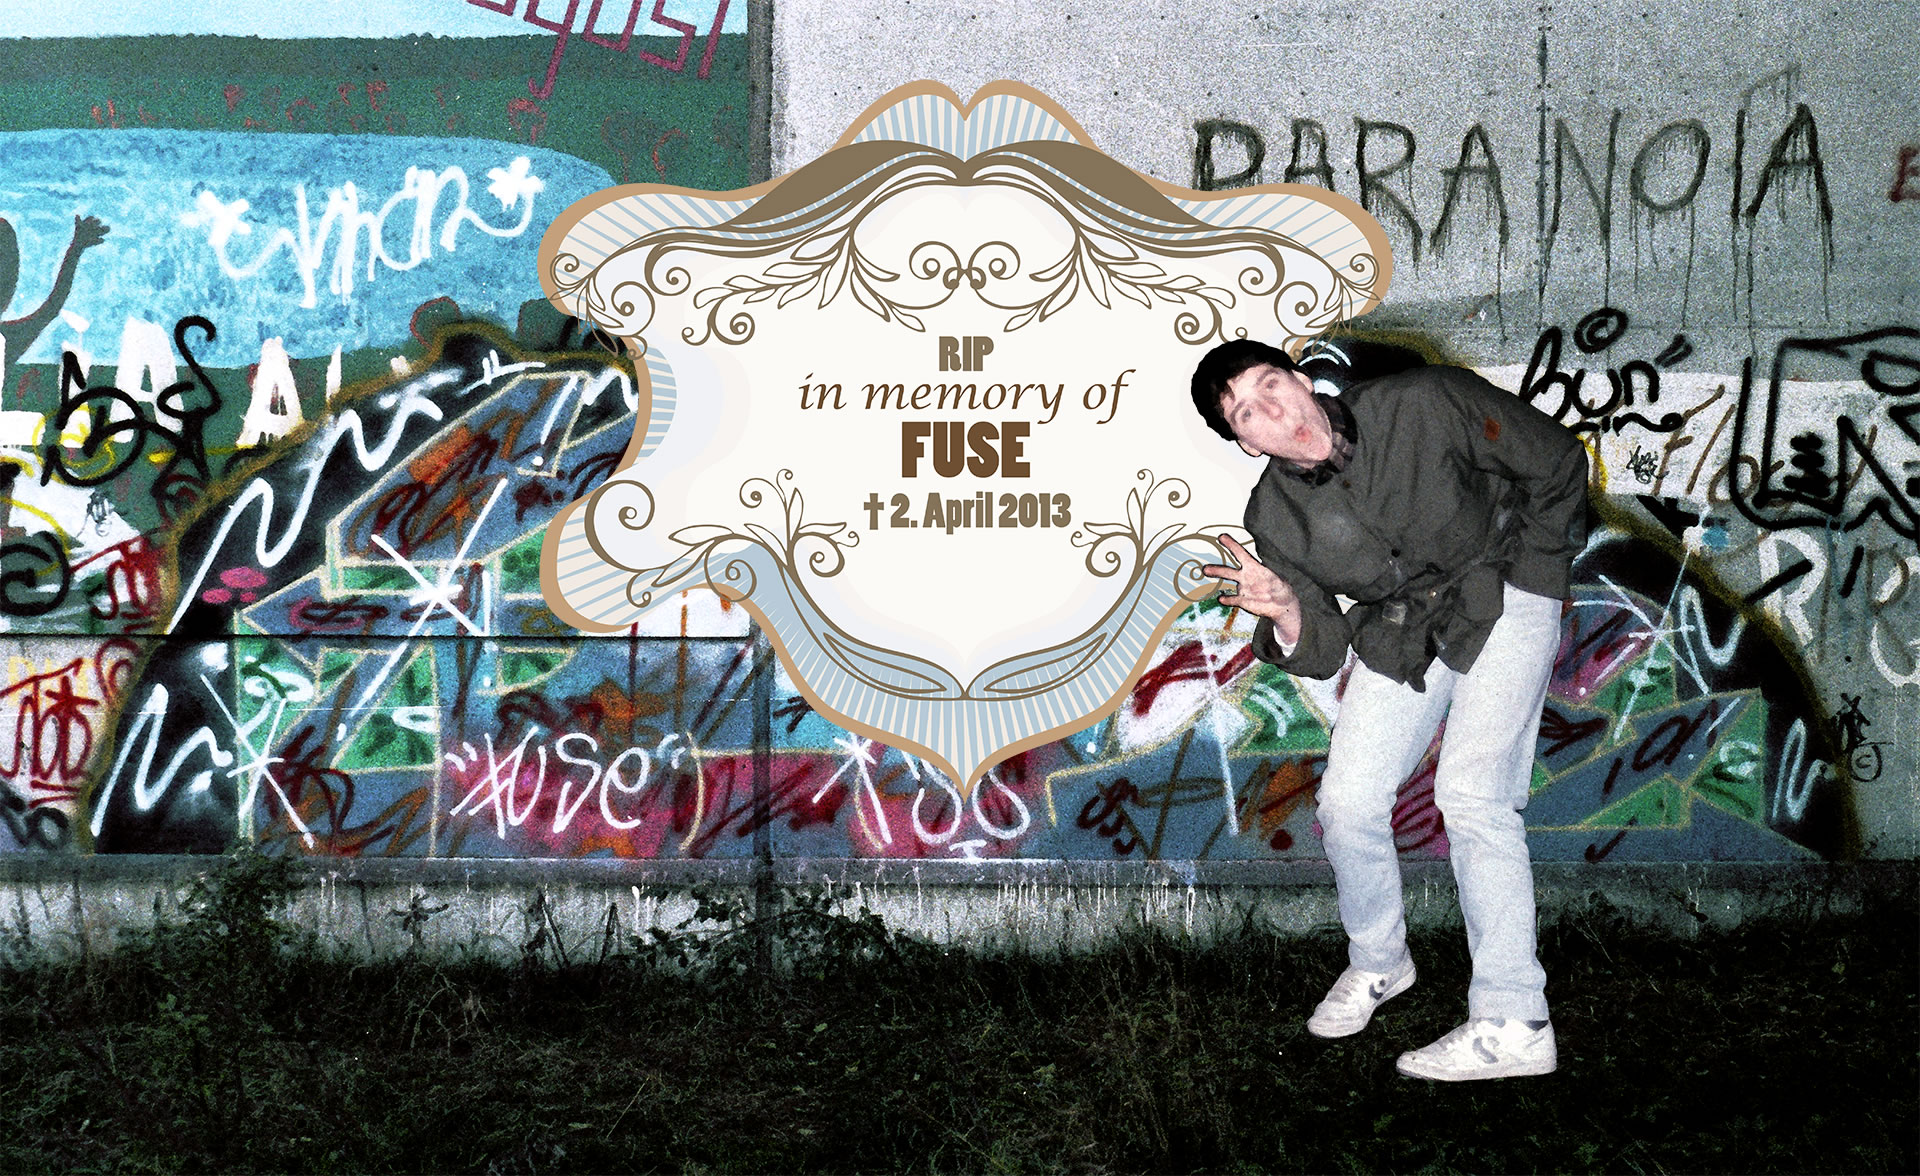 ★ In Memory of Fuse ★ In front of his piece in Albertslund - The Dark Roses - 2. April 2013